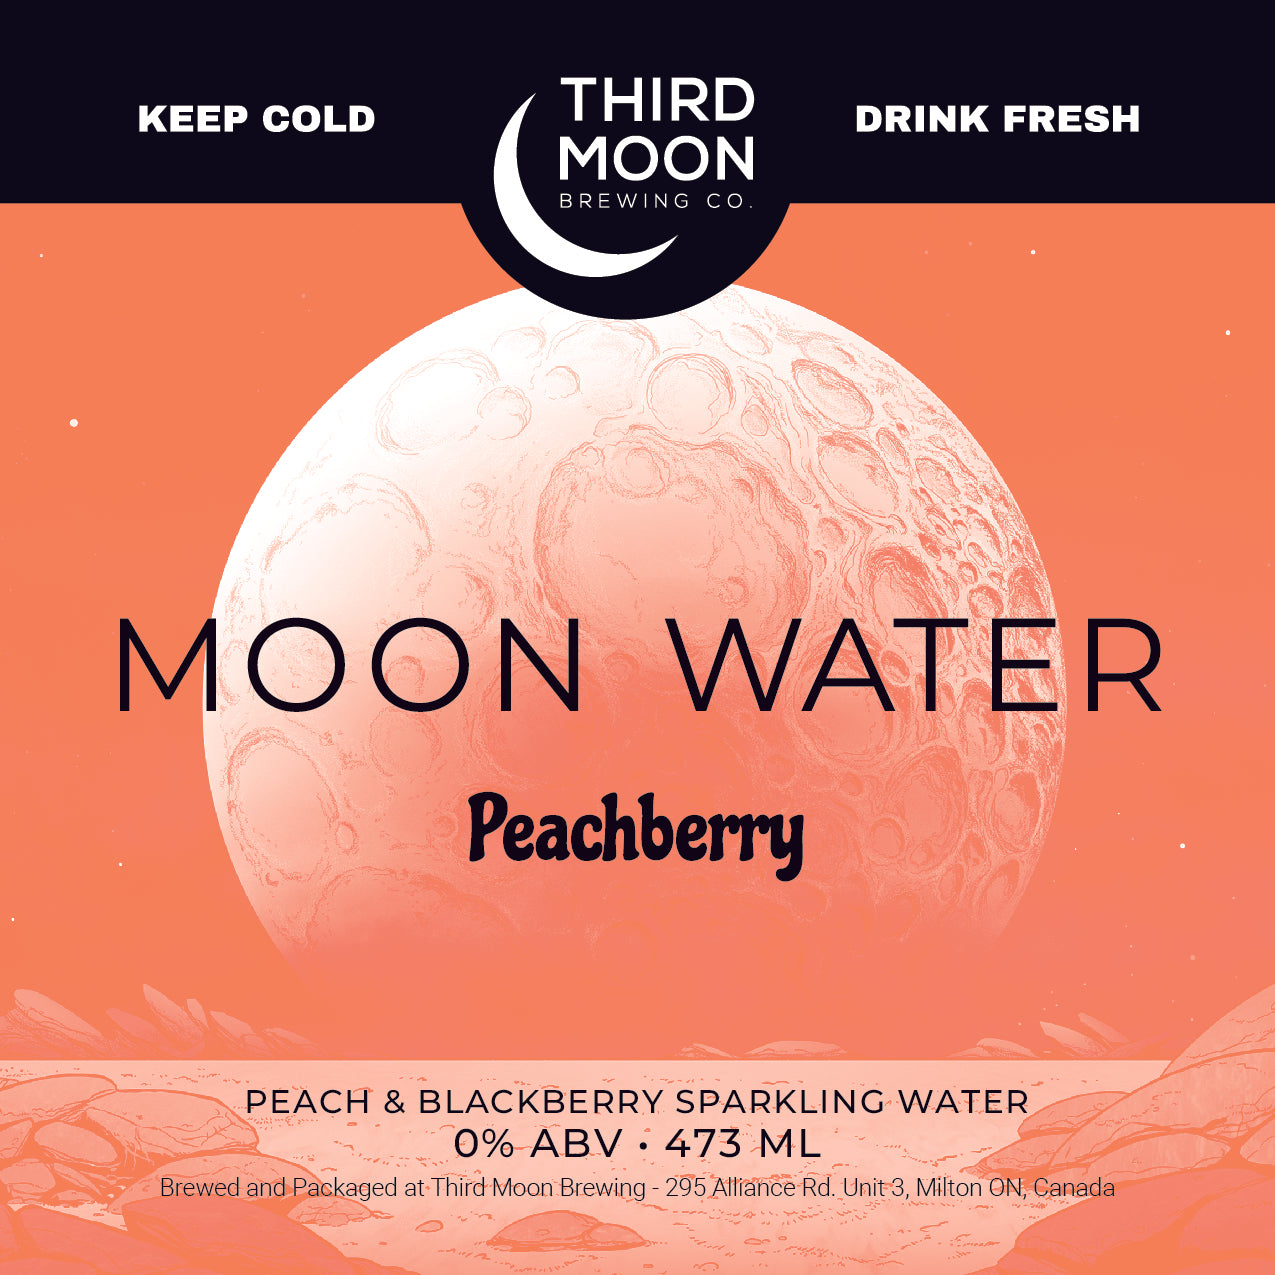 Sparkling Water - 4-pk of "Moon Water (Peachberry) tall cans